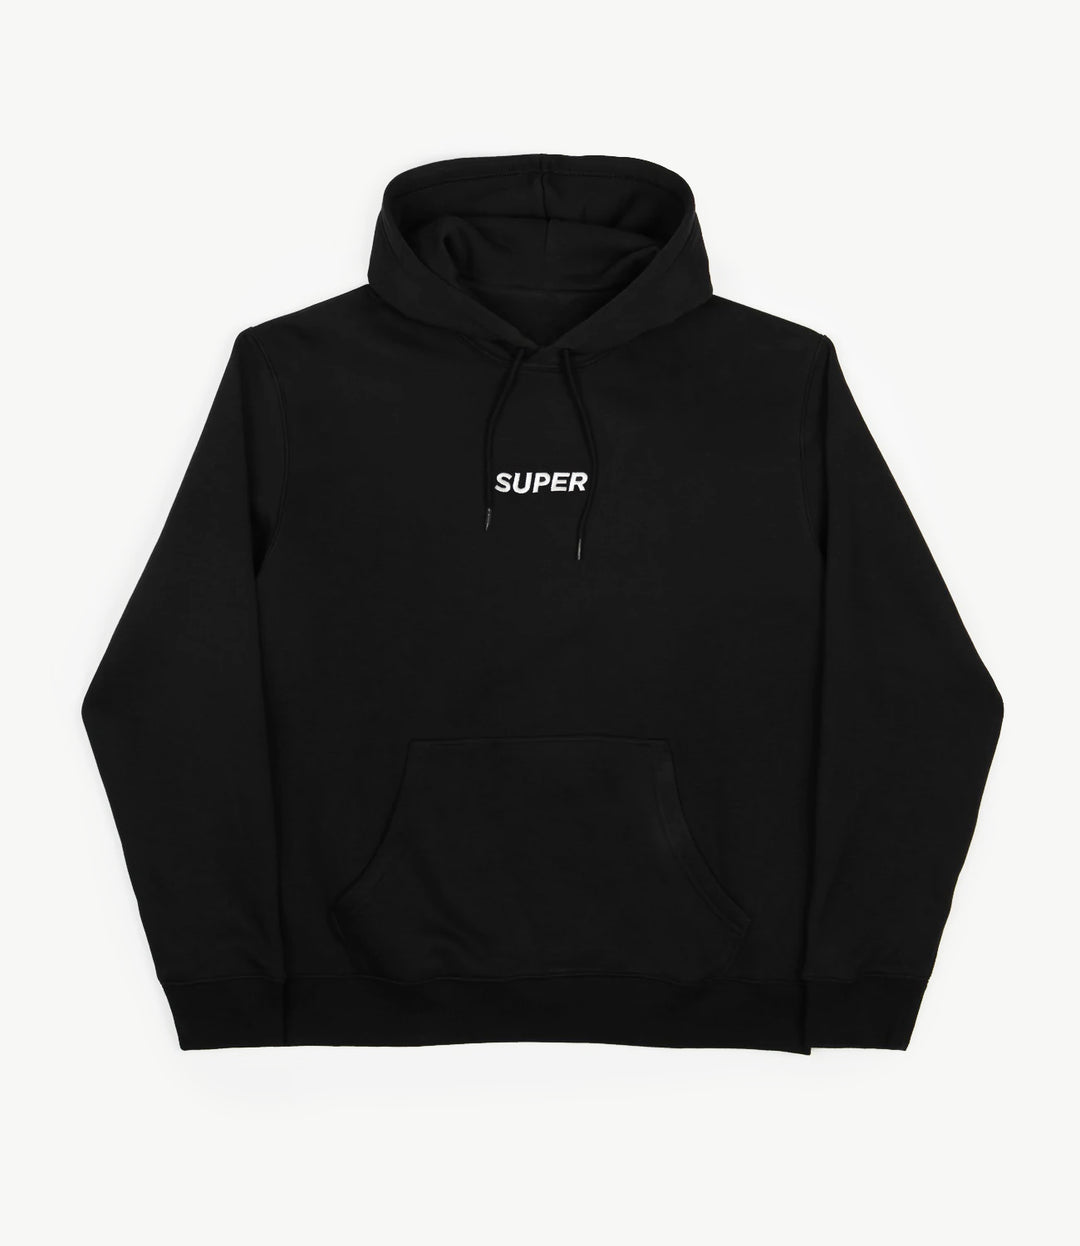 Super Embroidered (Hoody Black)